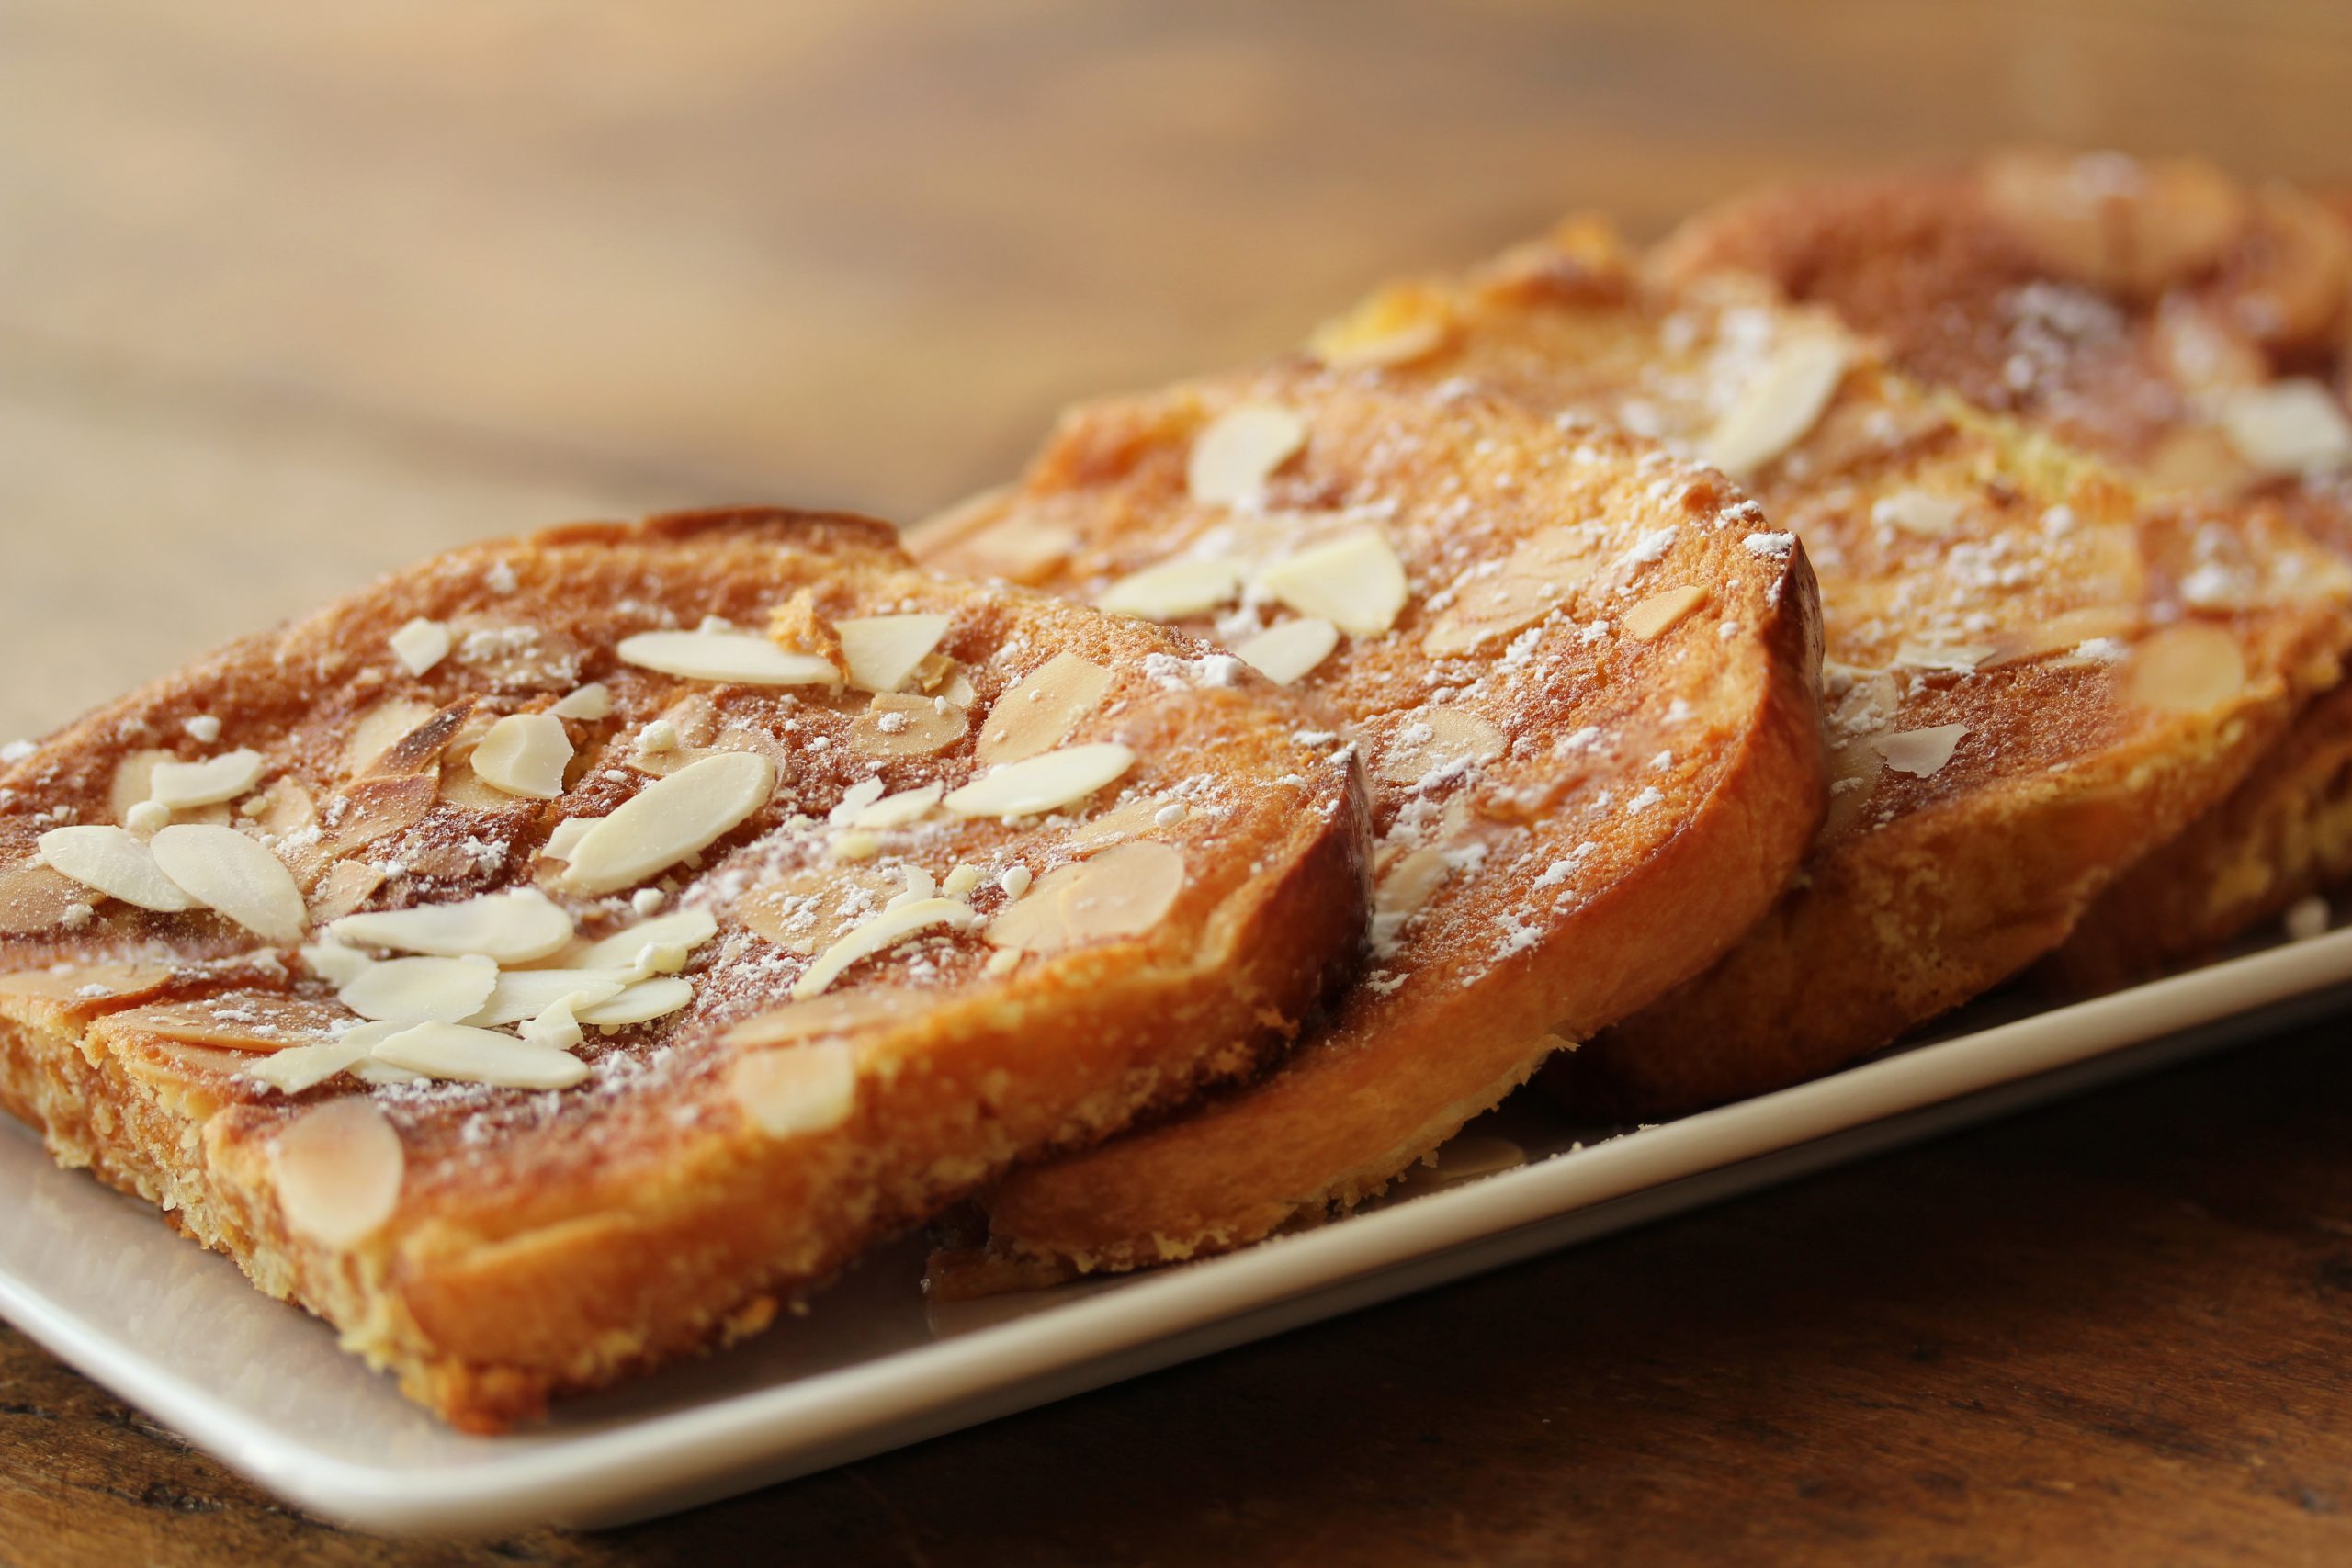 A New Favorite - Almond French Toast and Manuka Honey